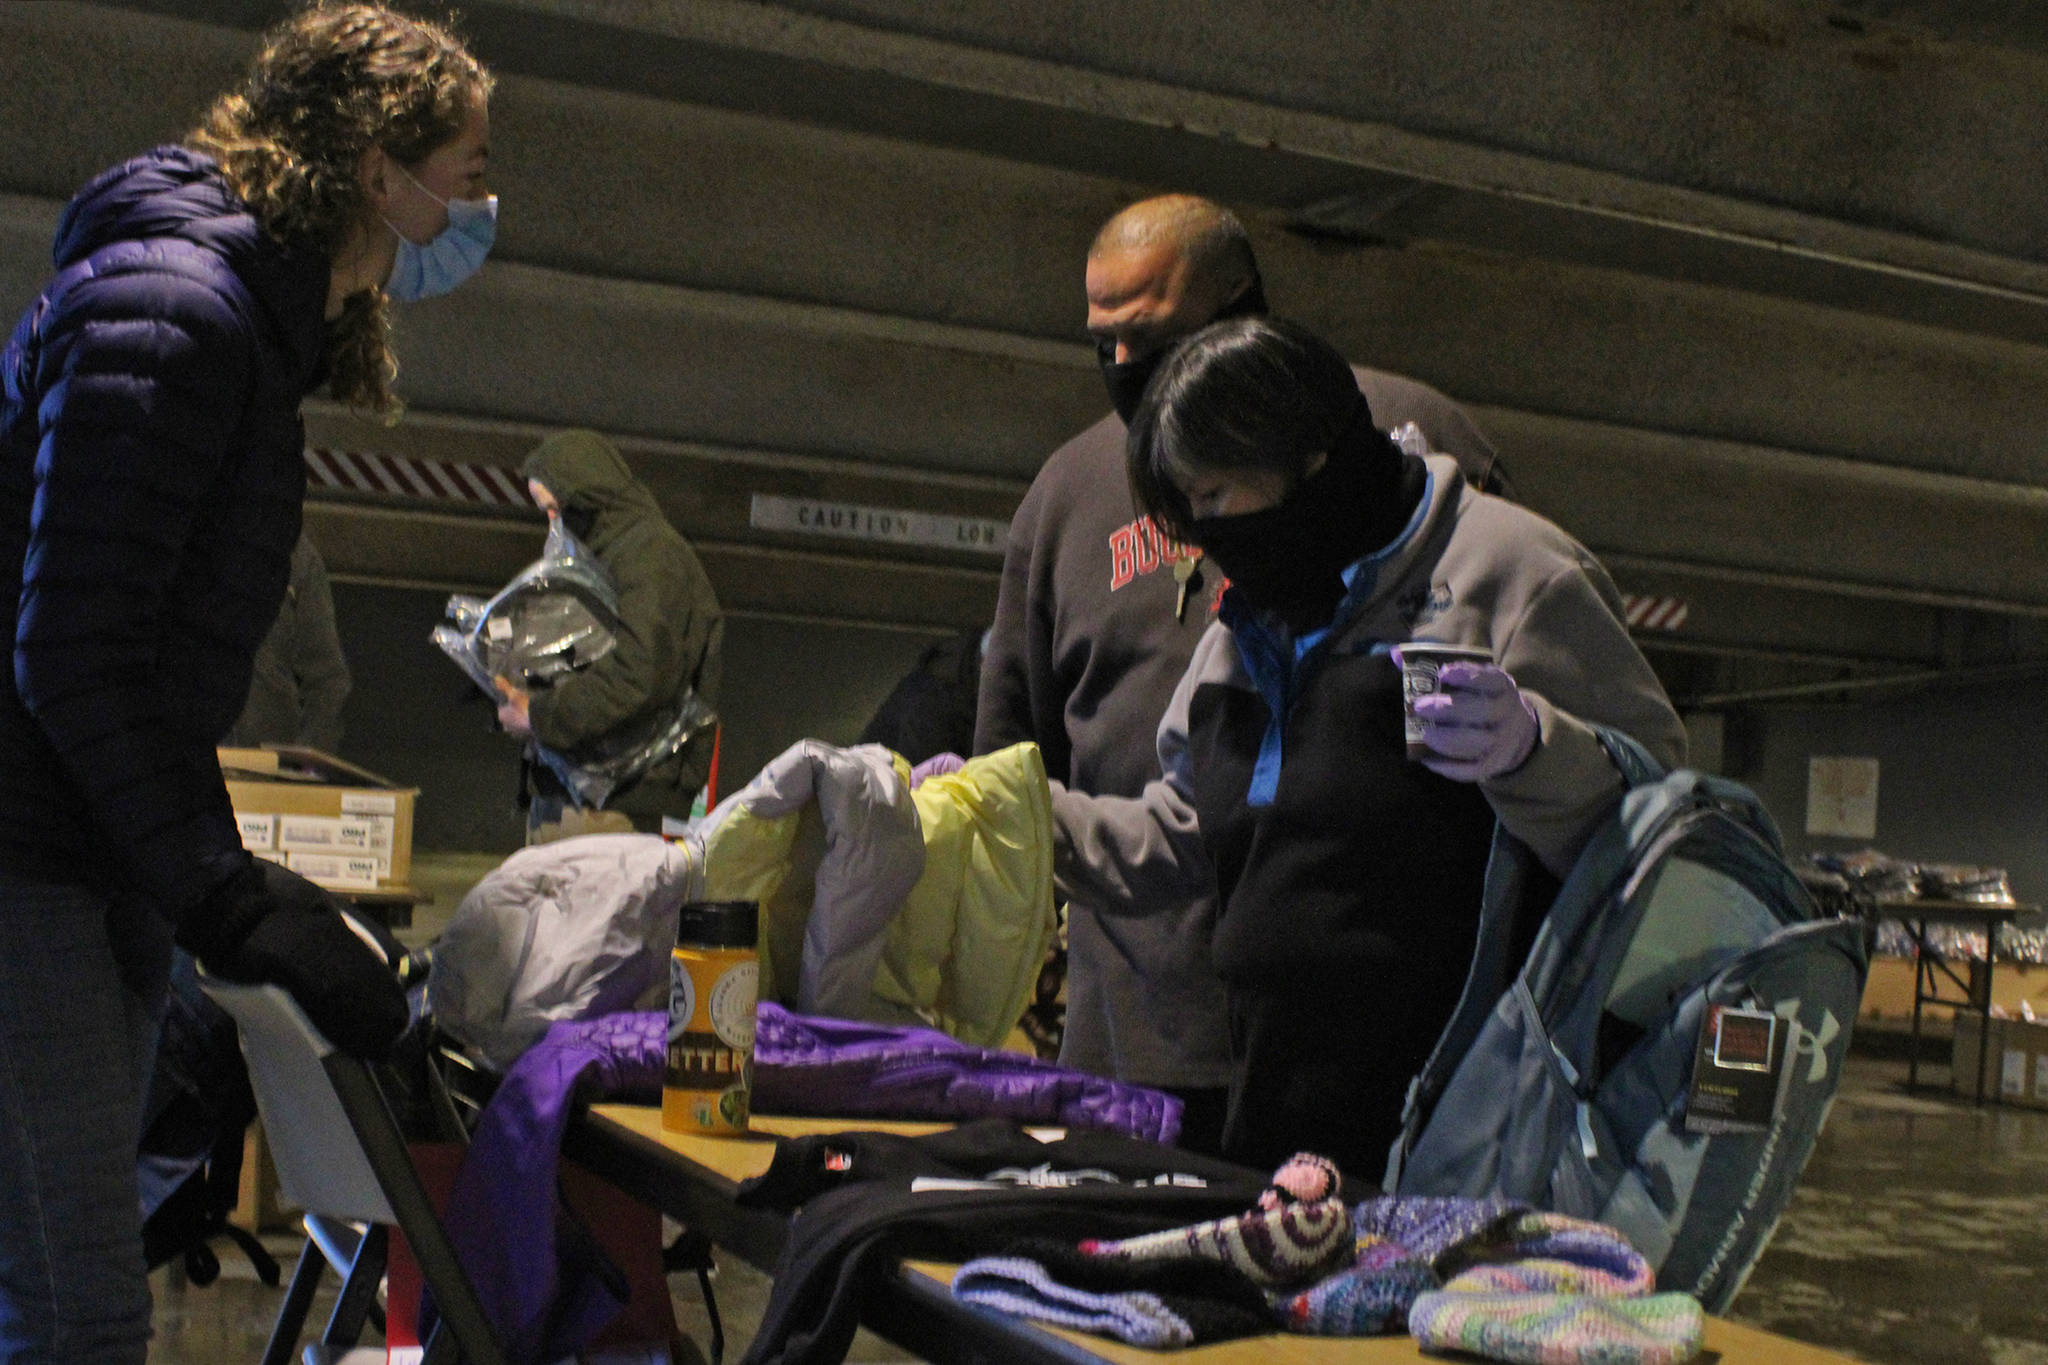 Kaitlyn Conway, youth outreach coordinator with the Zach Gordon Youth Center, talks to people who identified themselves as Vivian and Al, Saturday in the Marine Parking Garage. About 60 people had turned out to the event to provide on-the-spot assistance to people experiencing homelessness within its first hour, according to organizers. (Ben Hohenstatt / Juneau Empire)